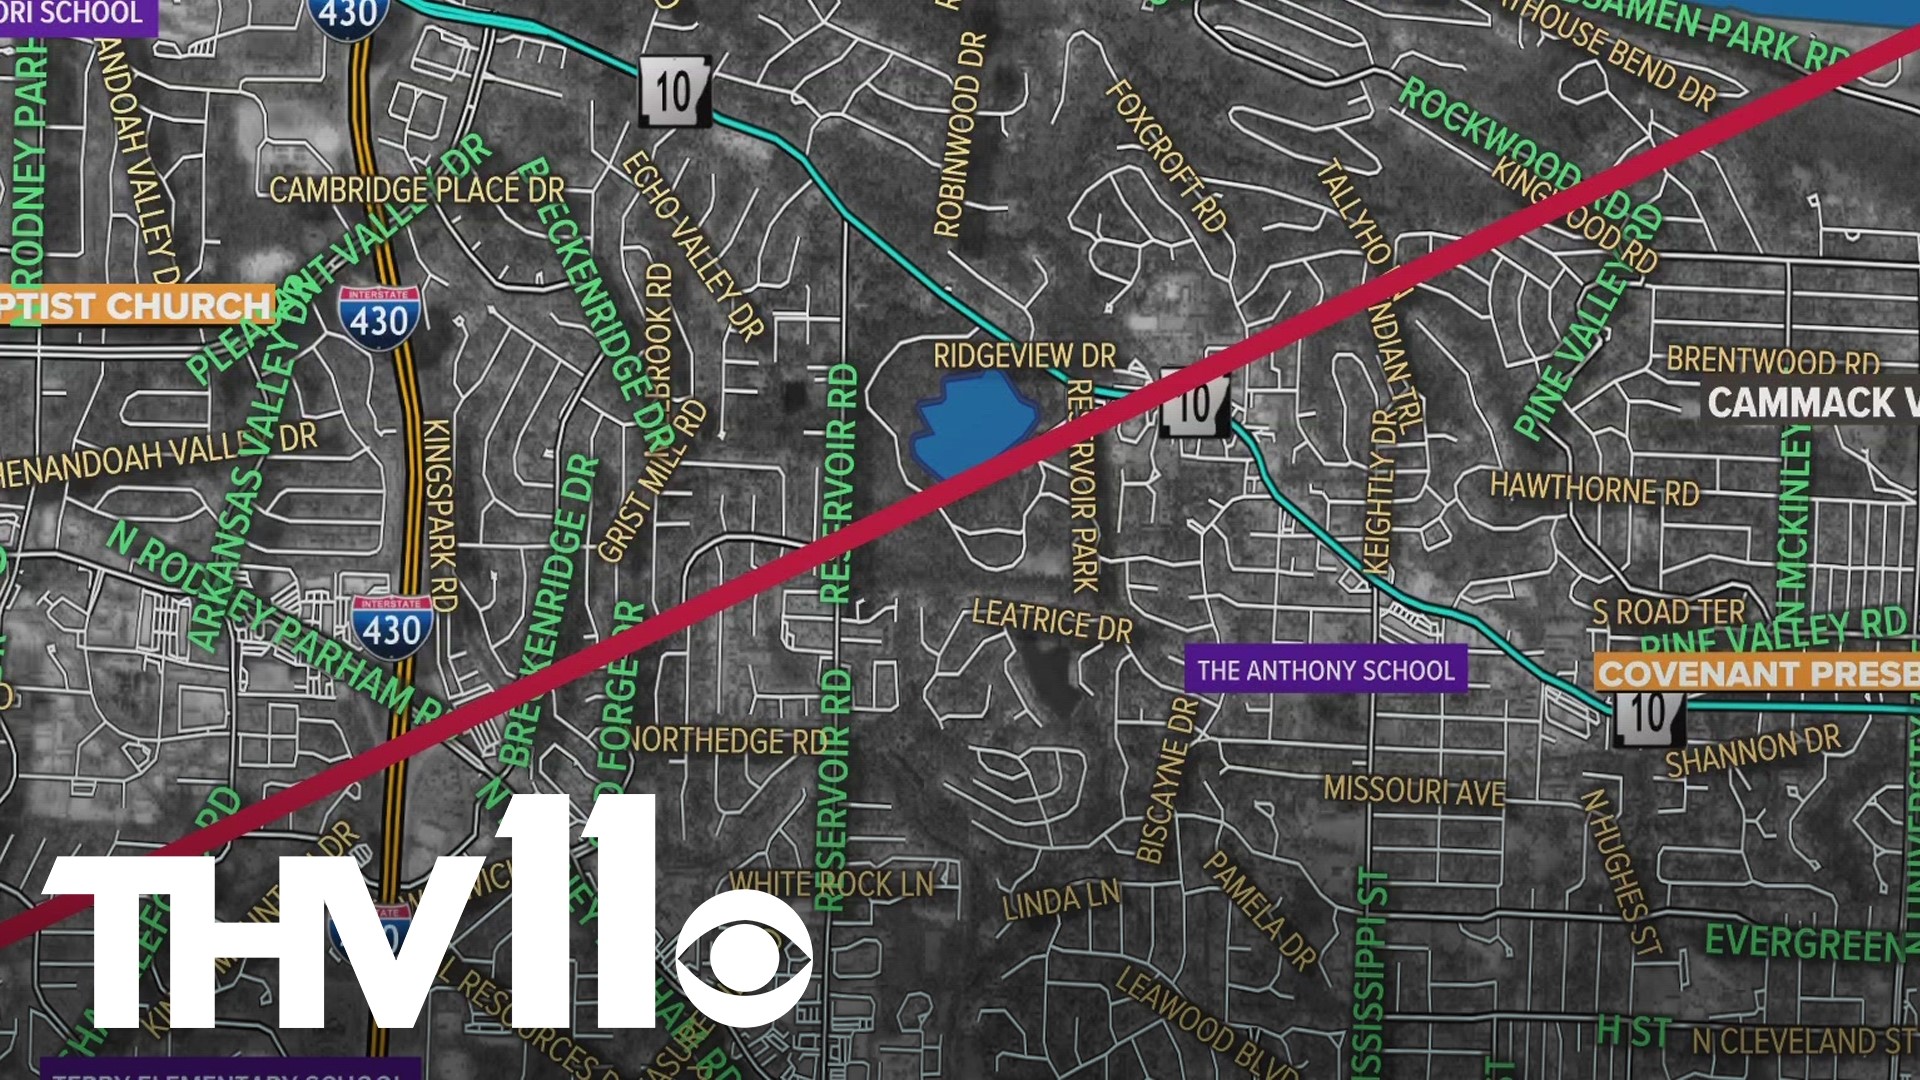 Here's the path the tornado took in West Little Rock, Arkansas on